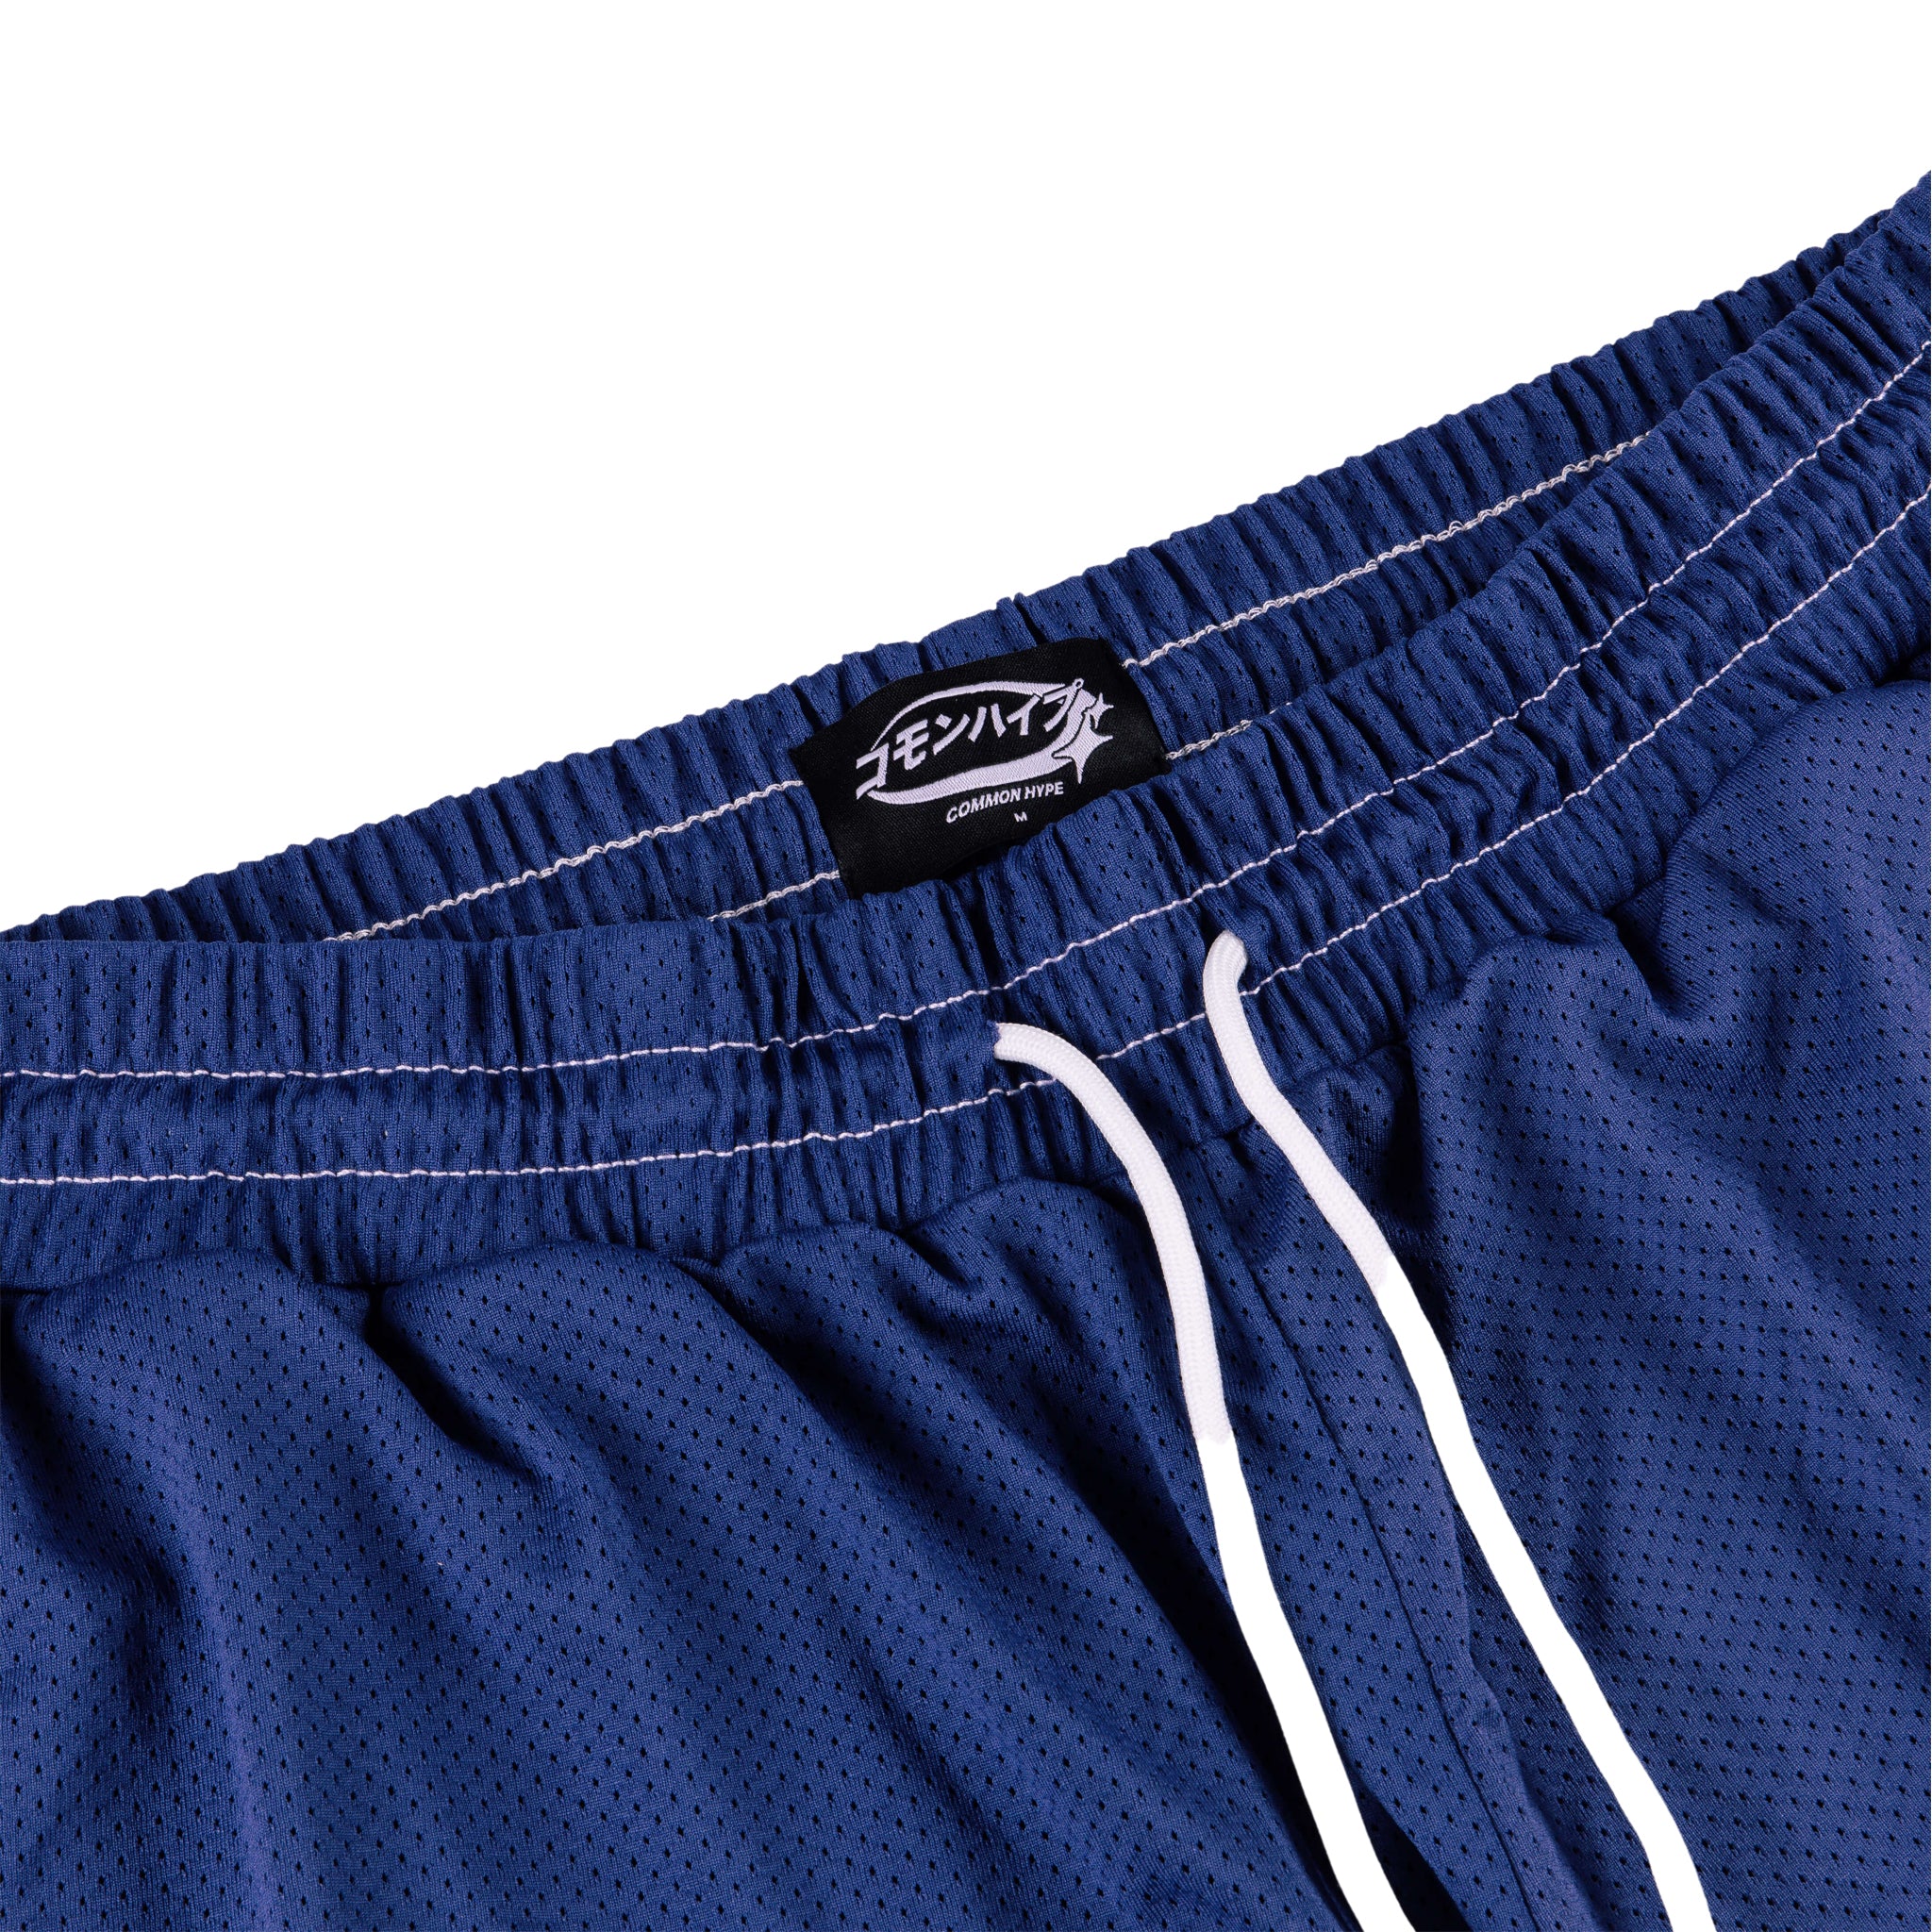 Common Hype Navy Blue Contrast Stitching Mesh Short